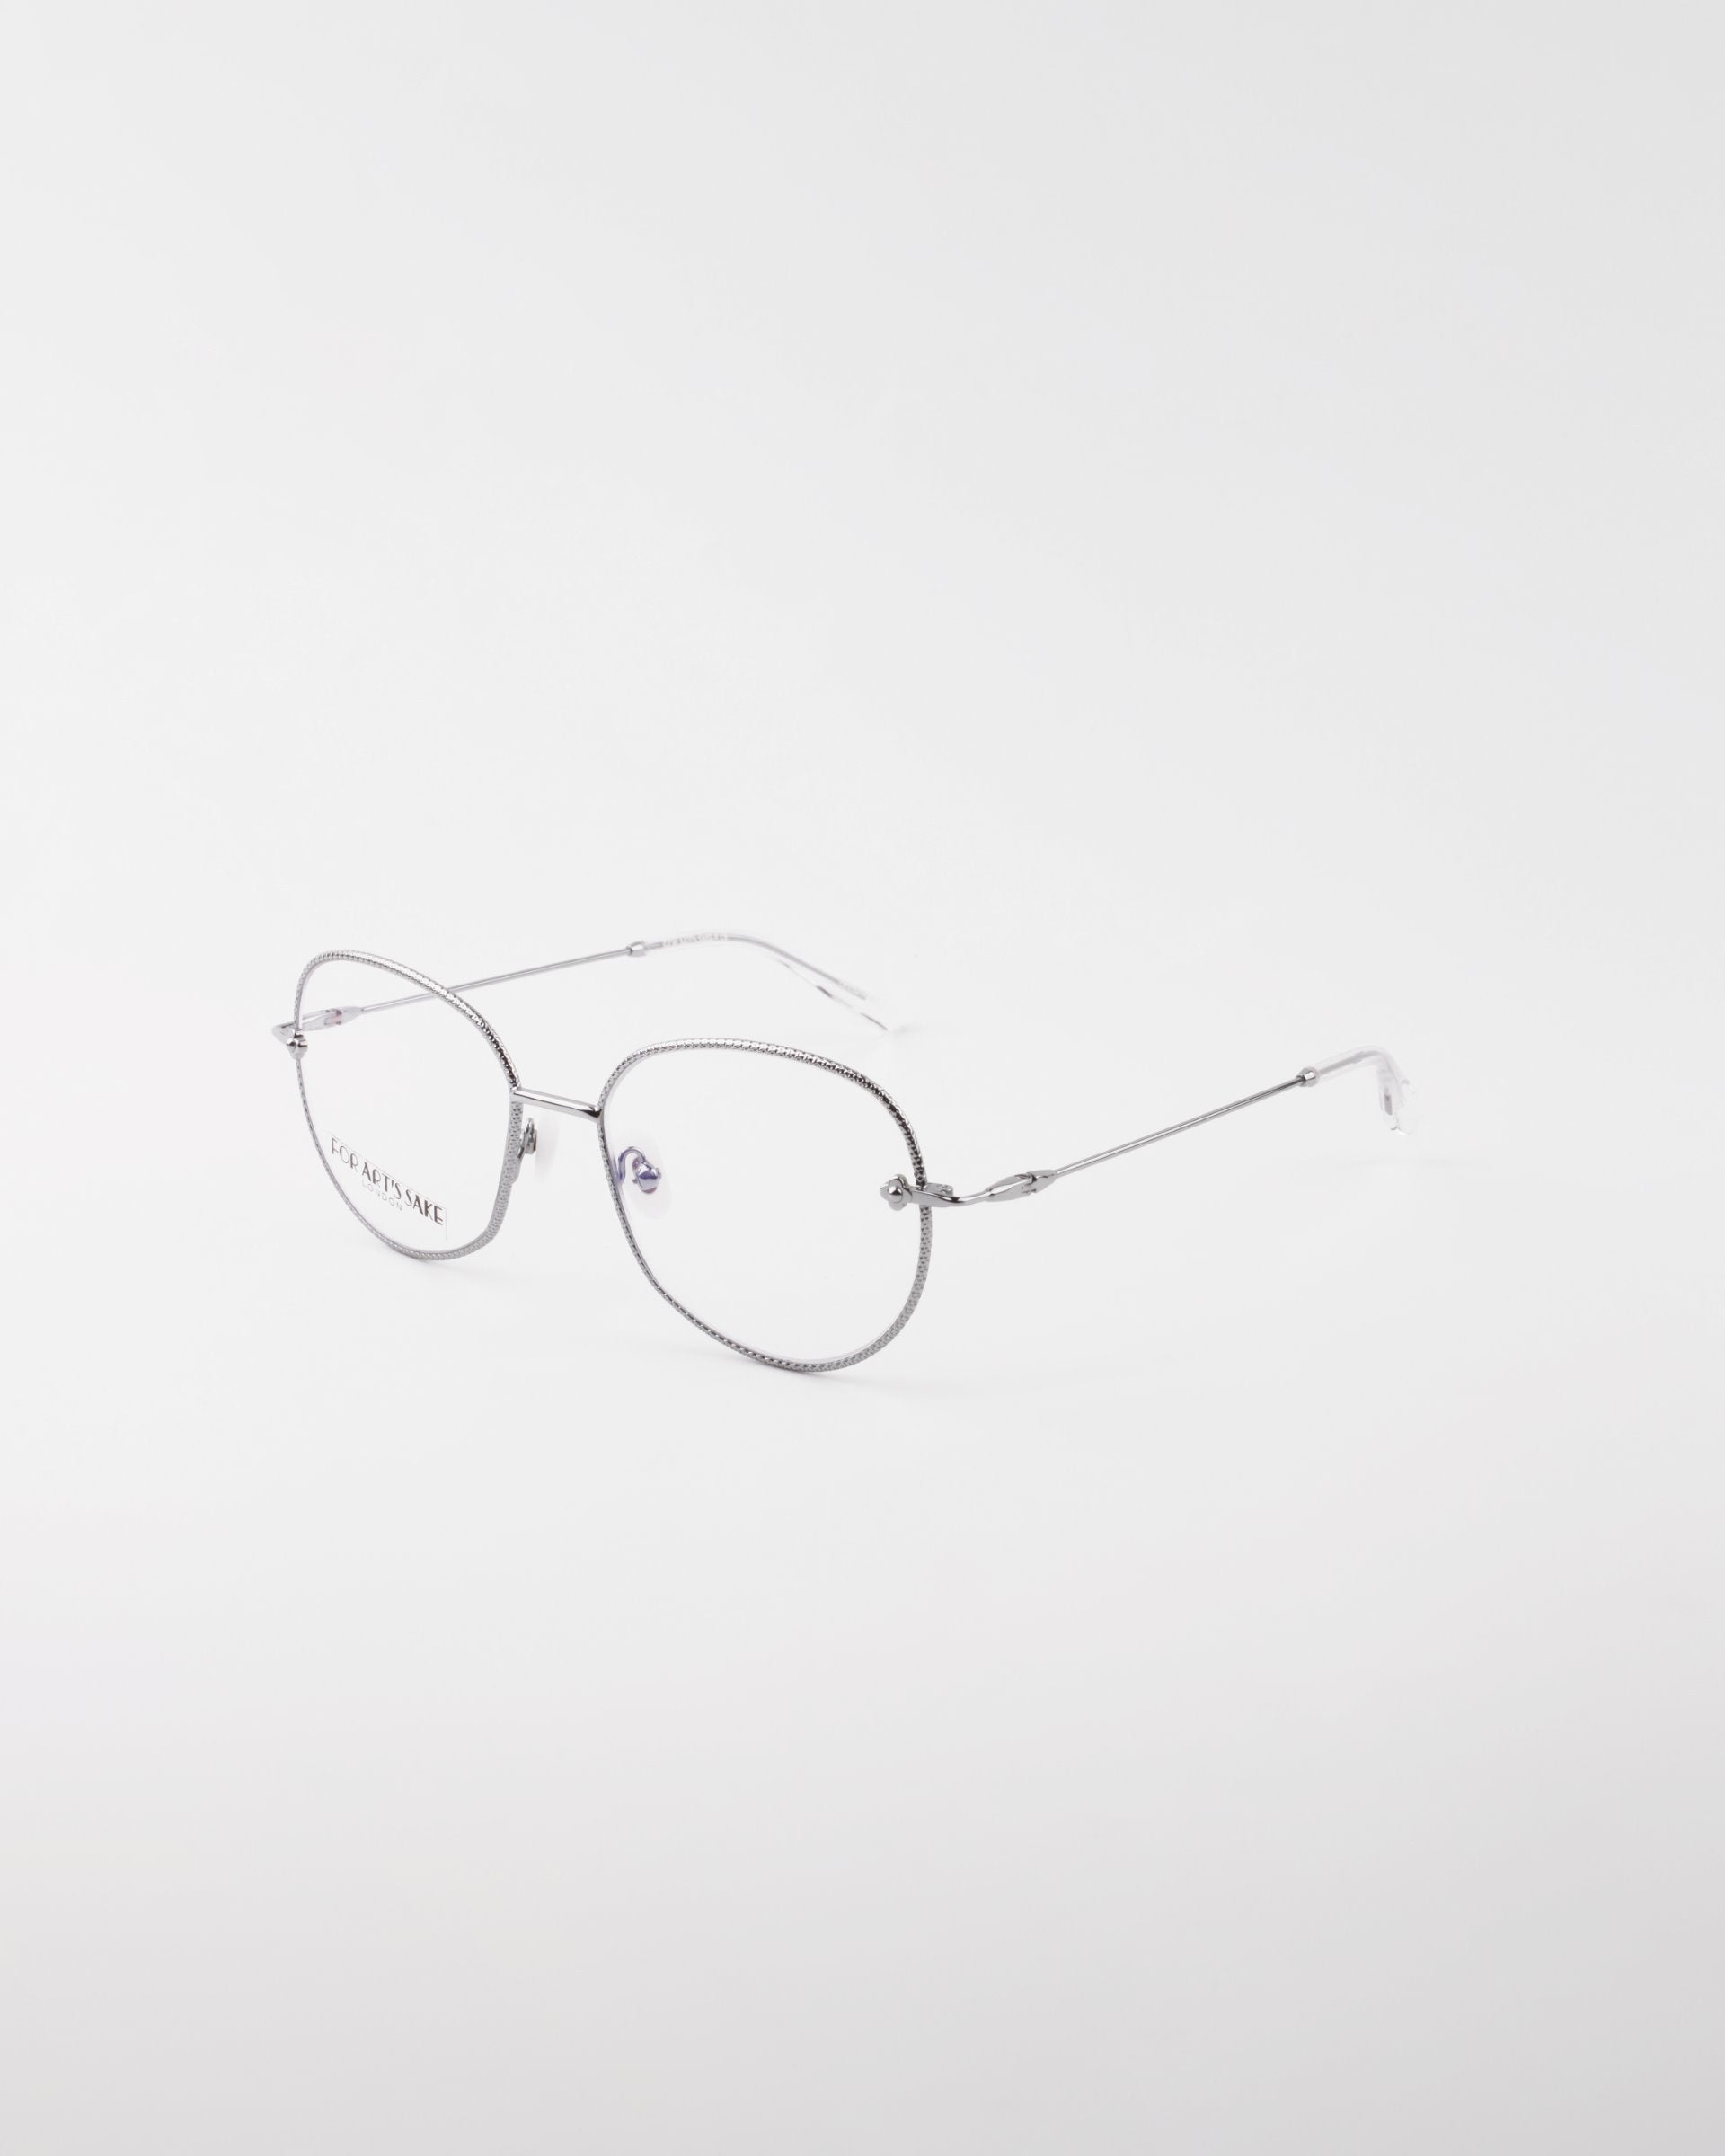 A pair of thin metal-framed eyeglasses with round lenses. The frames are gold-plated stainless steel, and the glasses are positioned at an angle against a plain white background. The minimalistic design gives this piece of handmade For Art's Sake® Jasmine eyewear an elegant and sleek appearance.